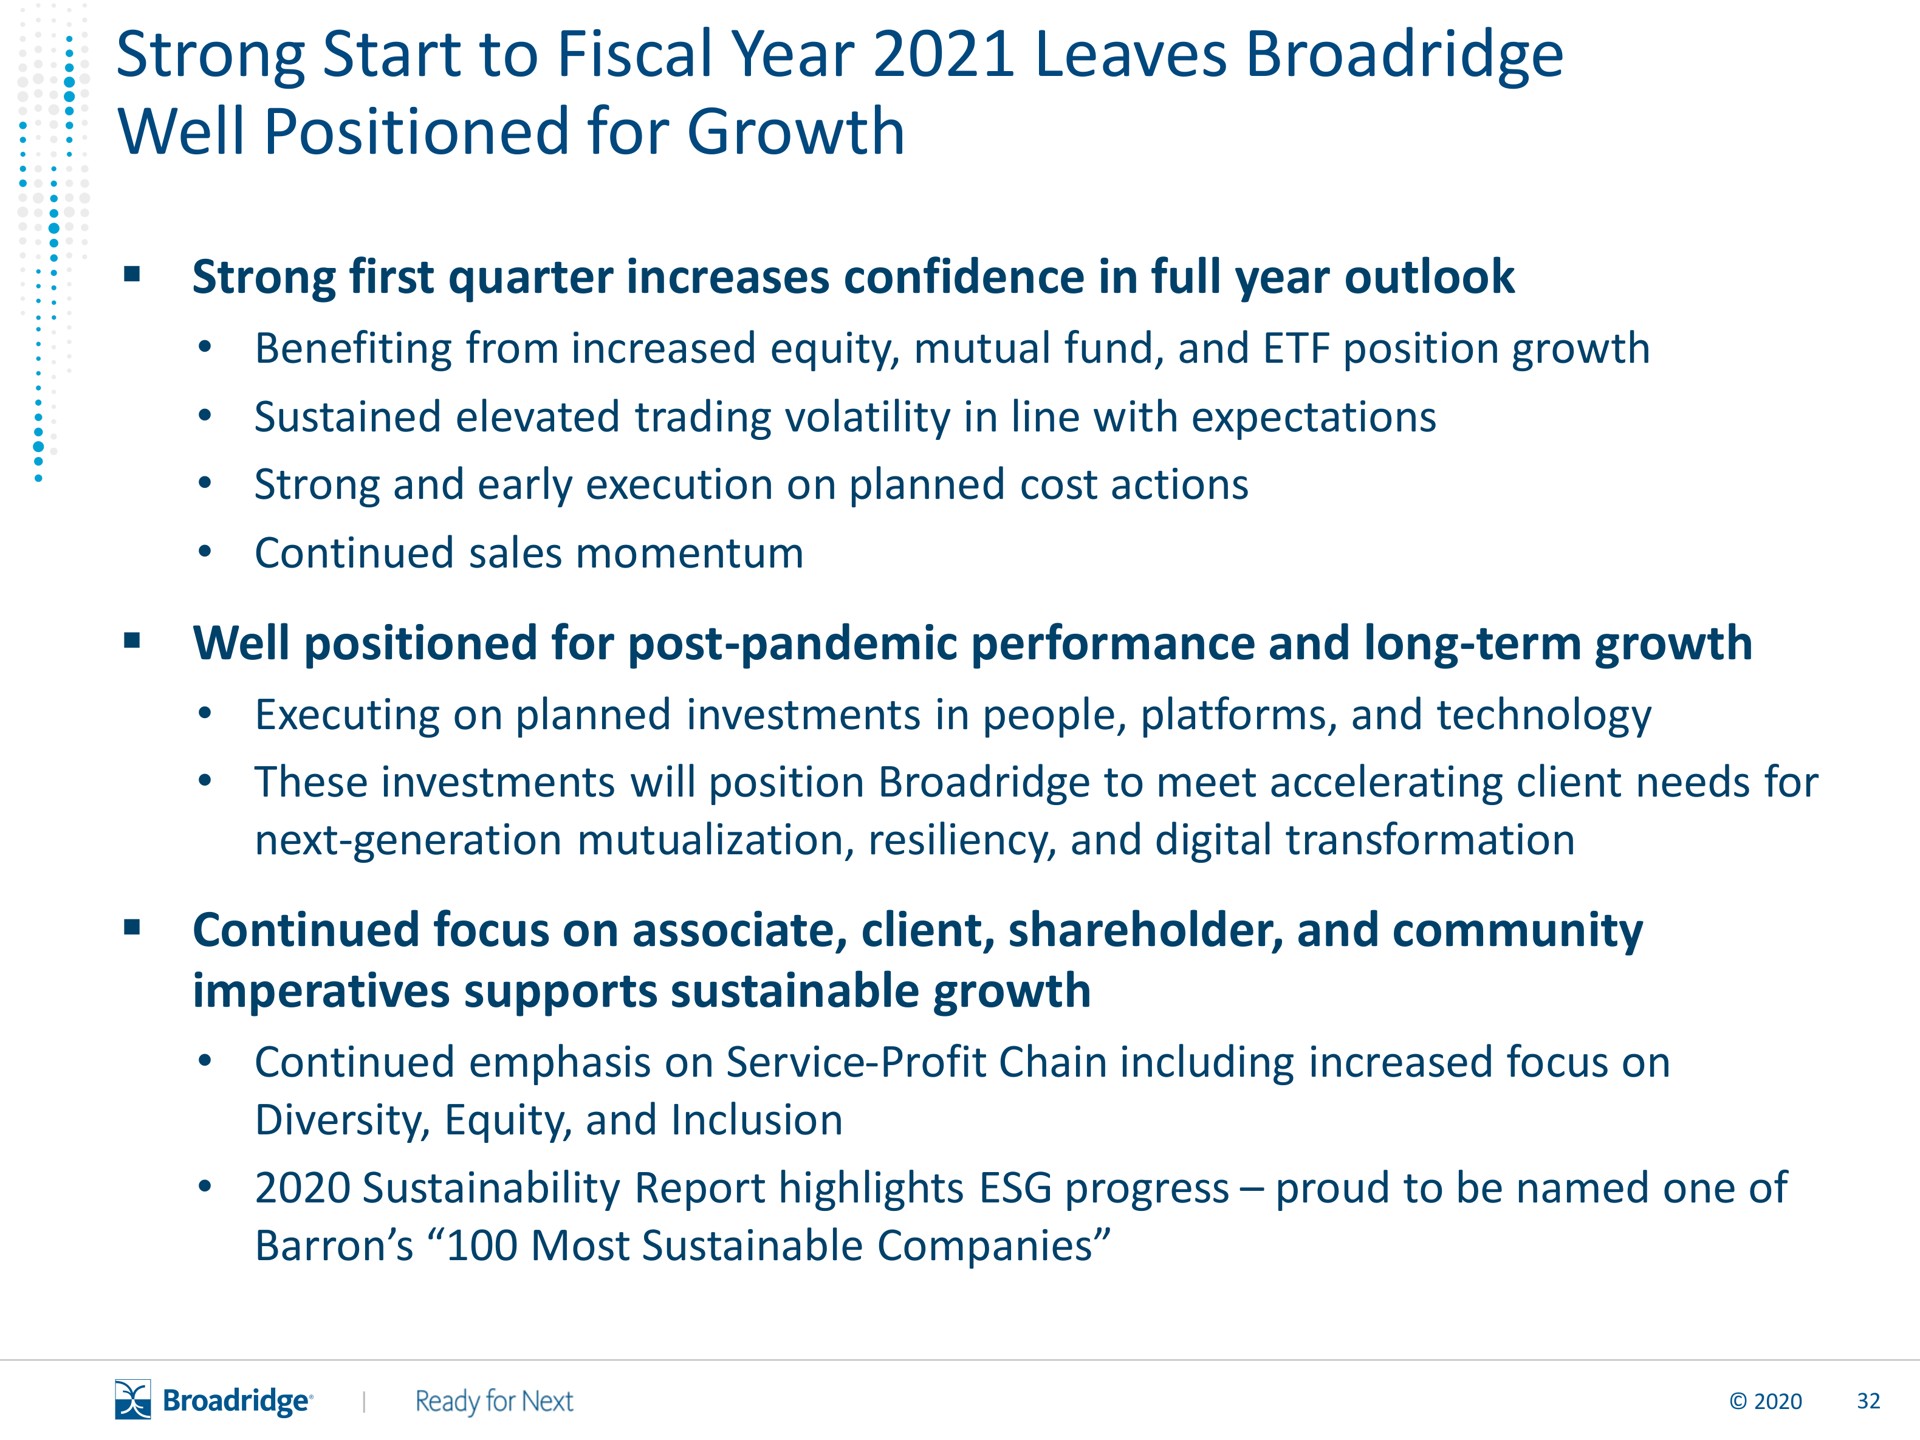 strong start to fiscal year leaves well positioned for growth | Broadridge Financial Solutions